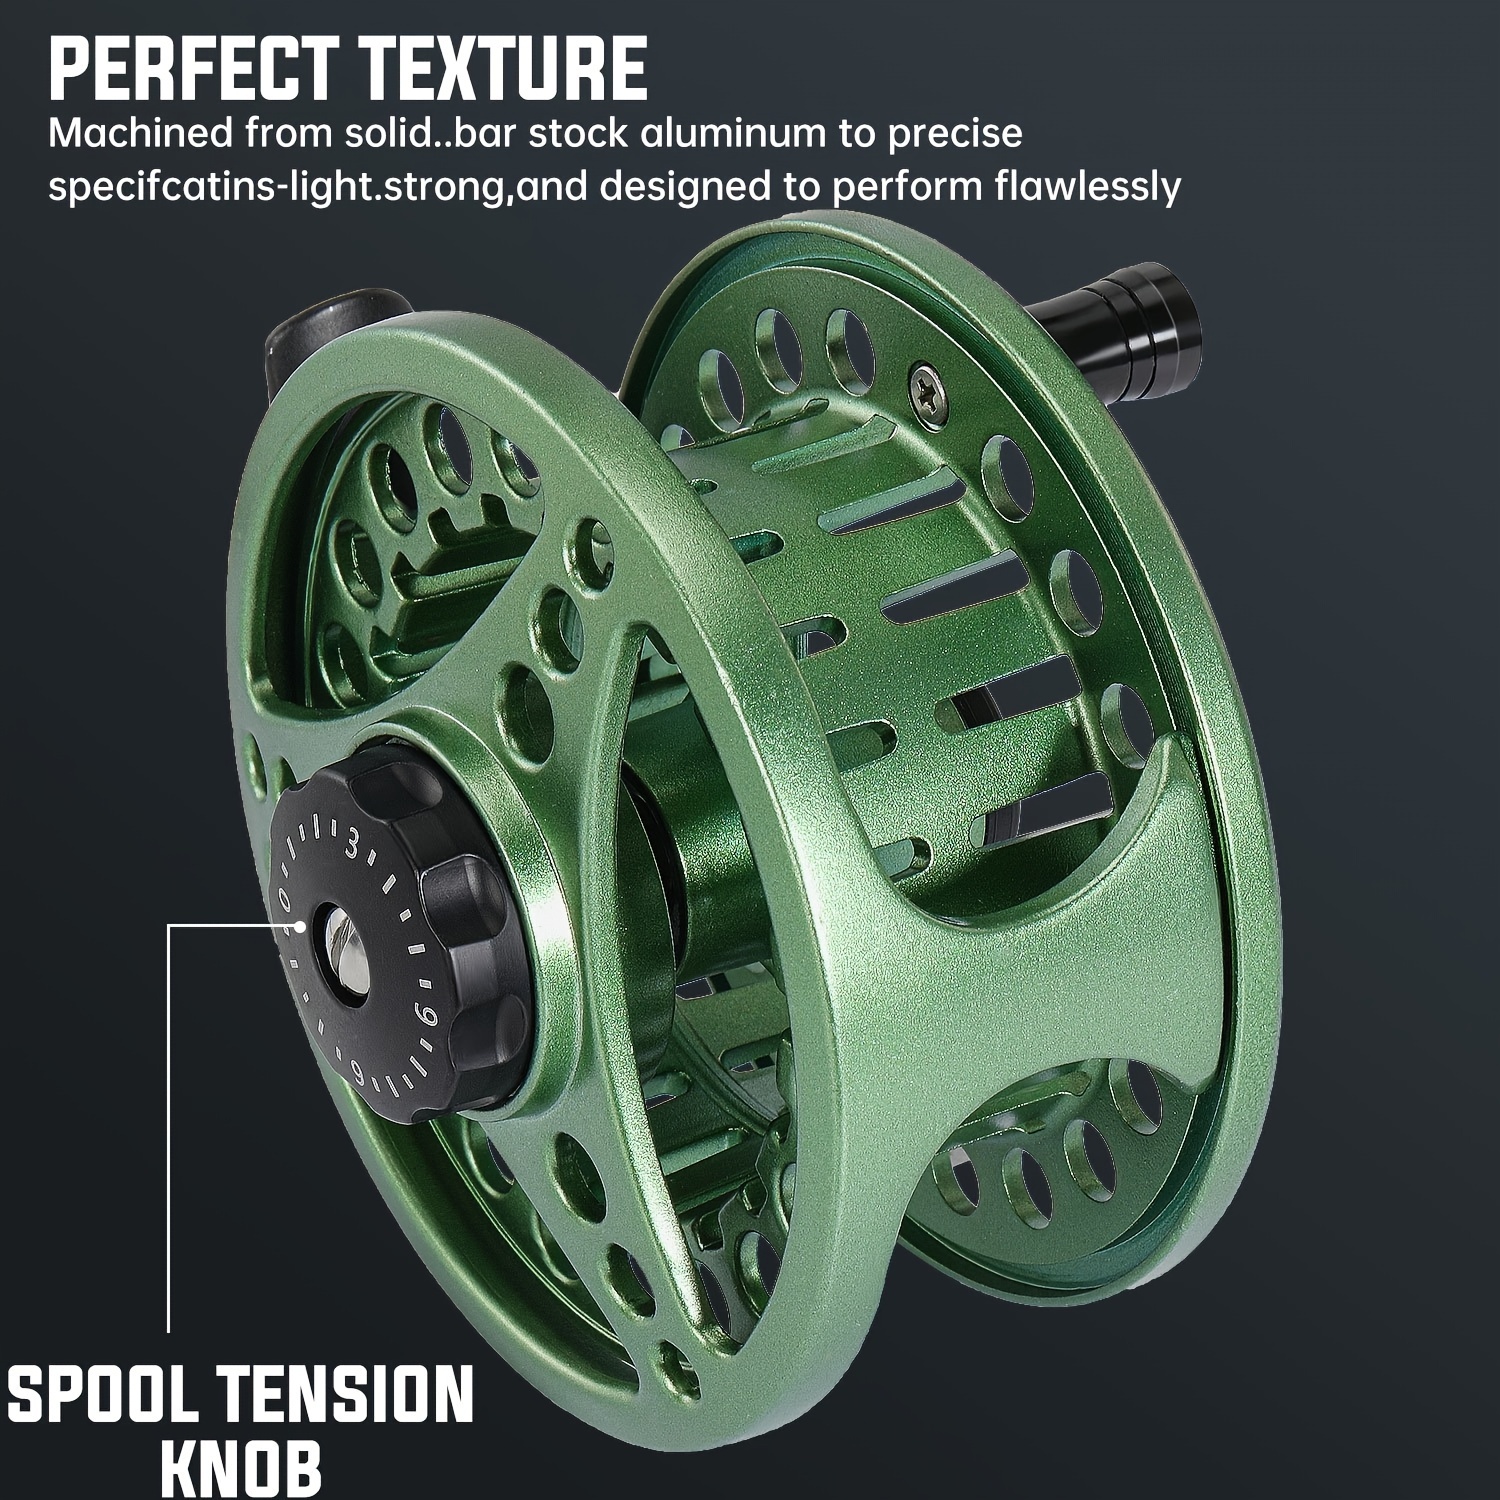 Yongzhi Fly Fishing Reel Corrosion-Resistant Hard-Anodized with  CNC-machined Aluminum Alloy Body Size 5/6